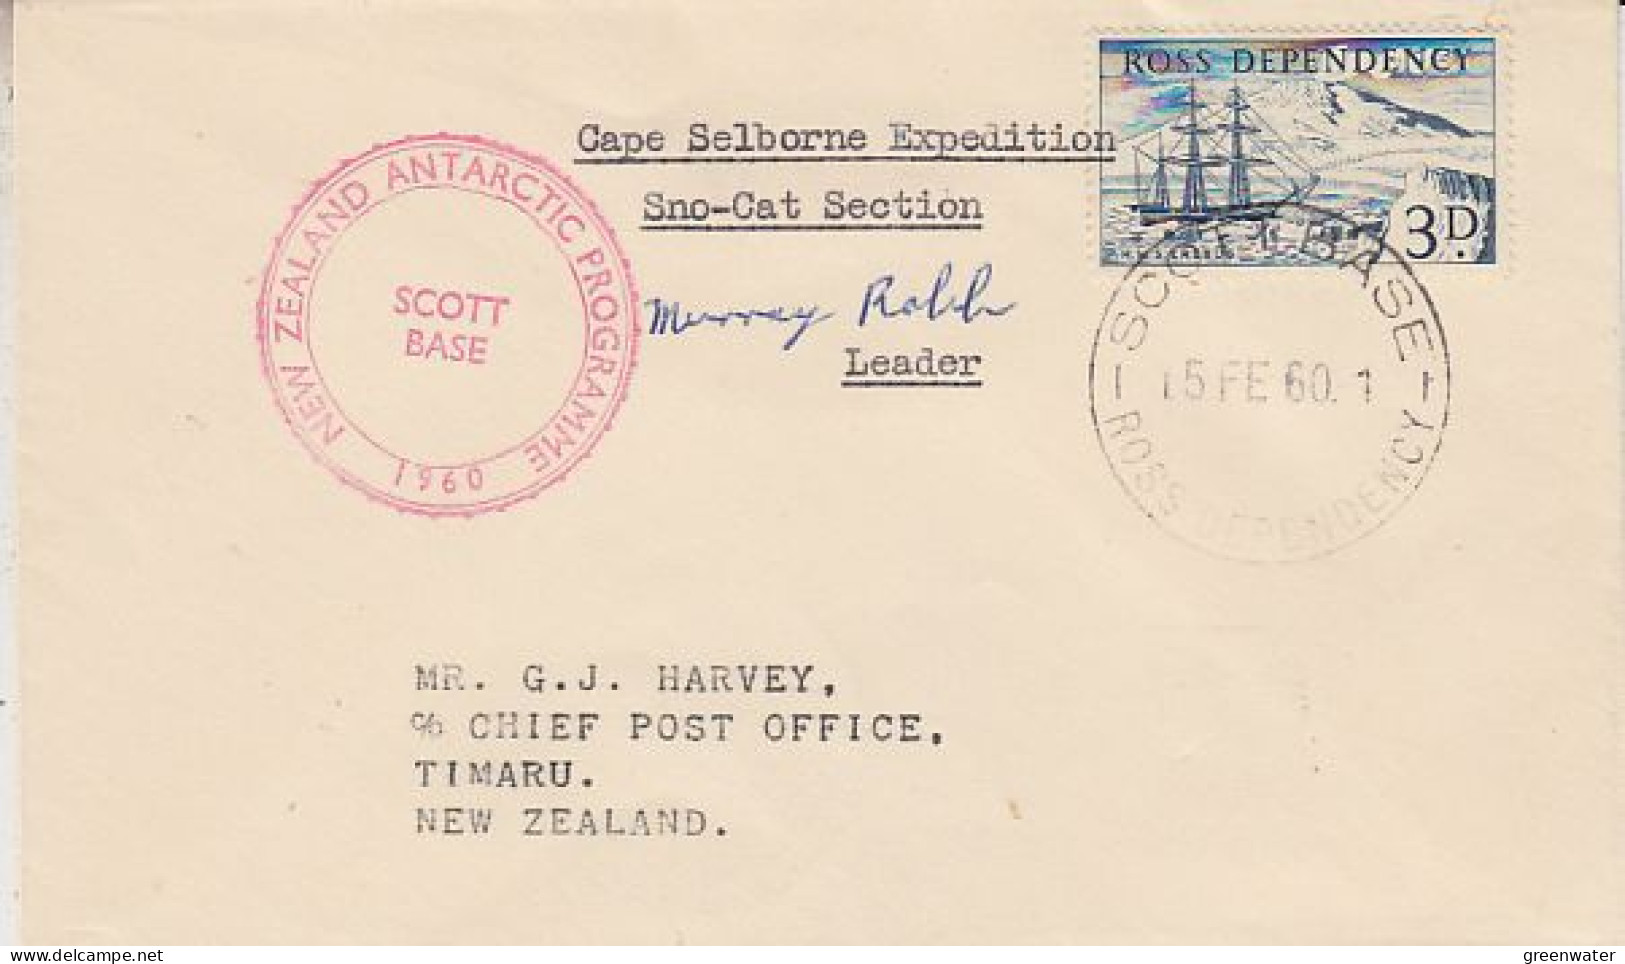 Ross Dependency Cape Selborne Expedition Sno-cat Section Signature Leader Ca Scott Base 15 FEB 1960 (RO188) - Covers & Documents